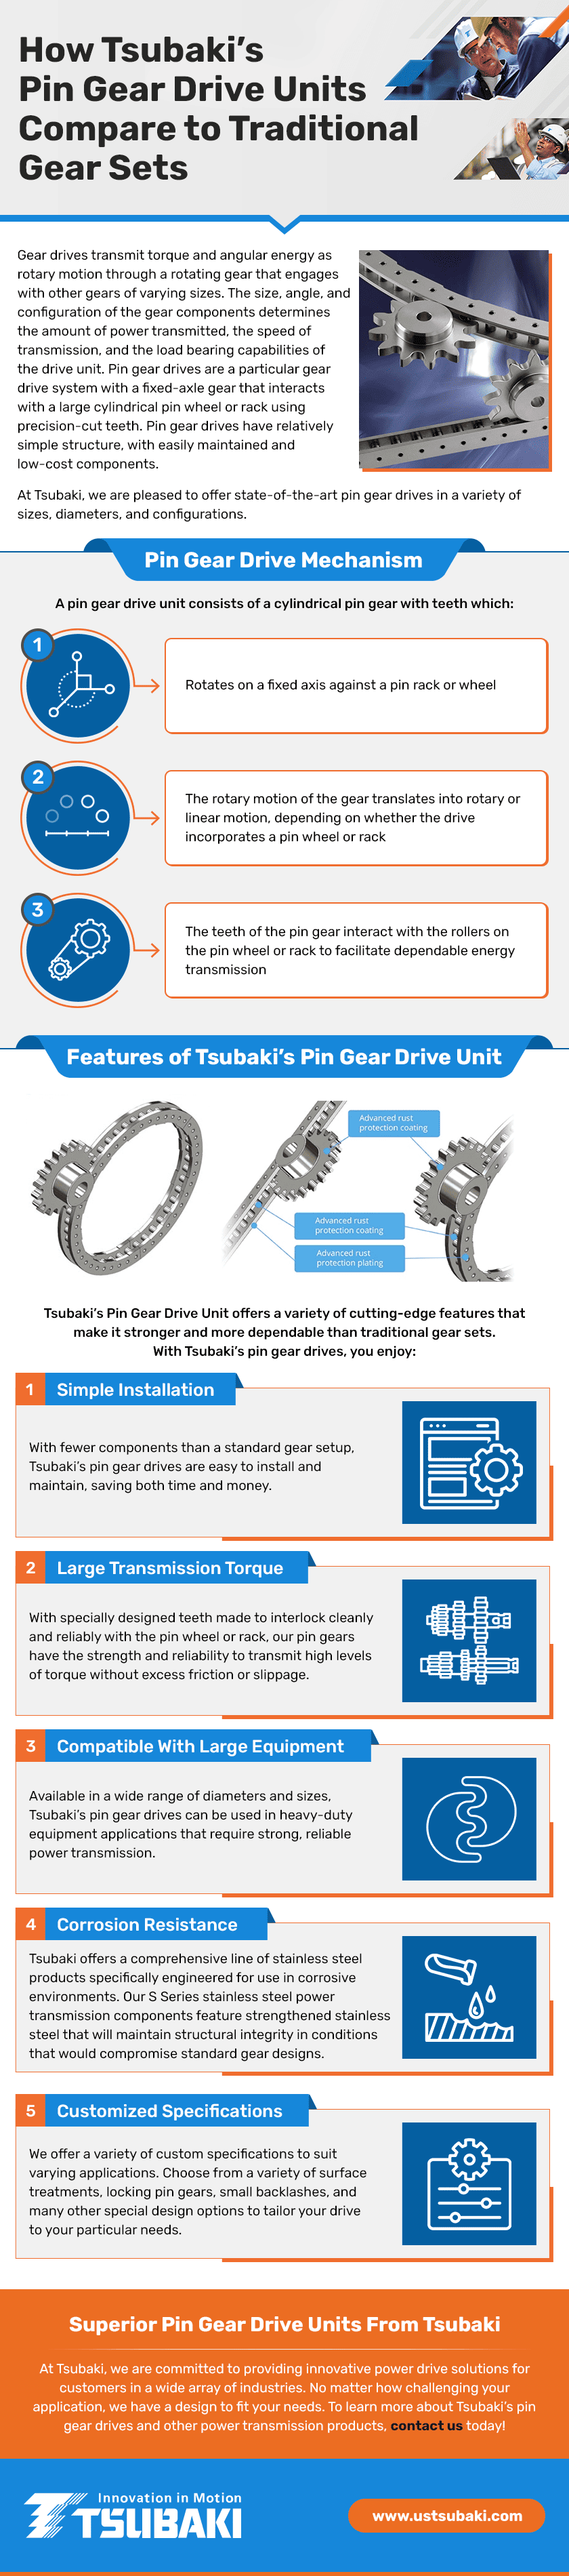 How Tsubaki’s Pin Gear Drive Units Compare to Traditional Gear Sets